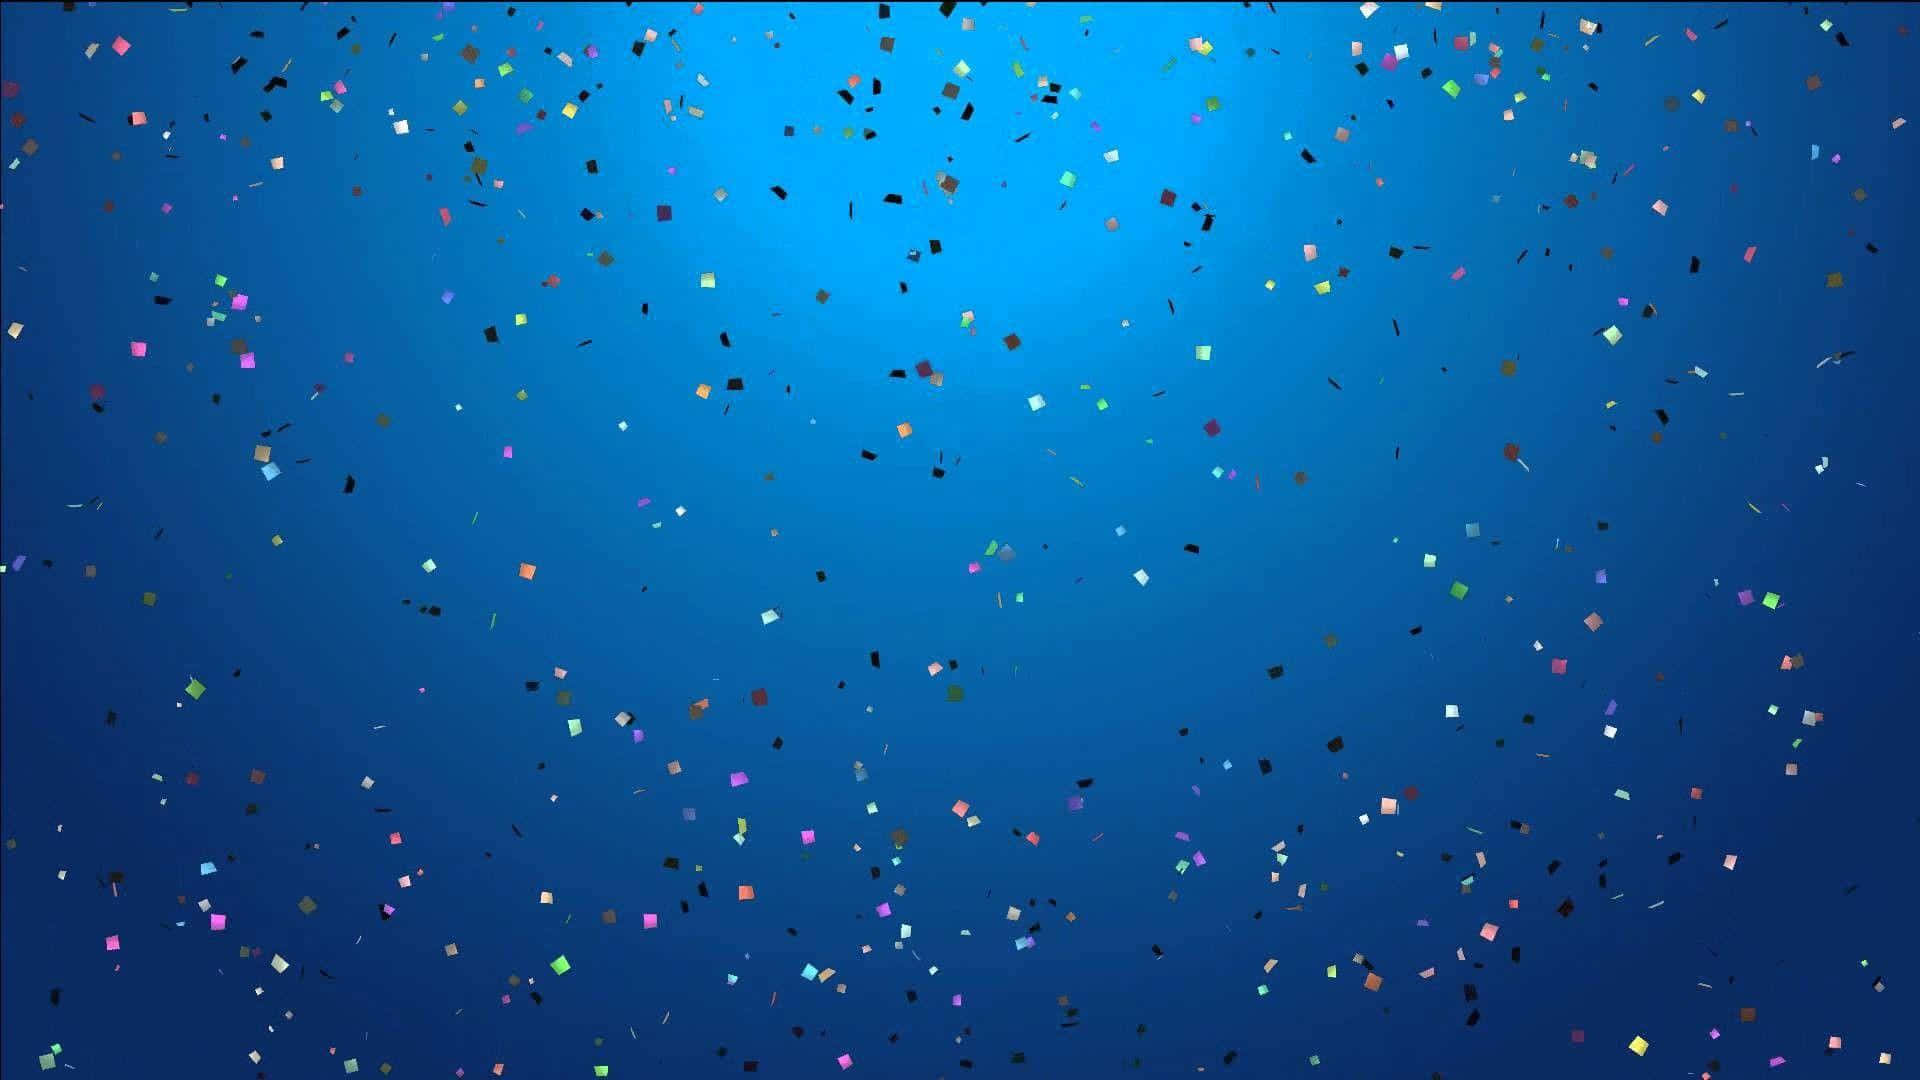 Celebrate with this festive blue birthday background.